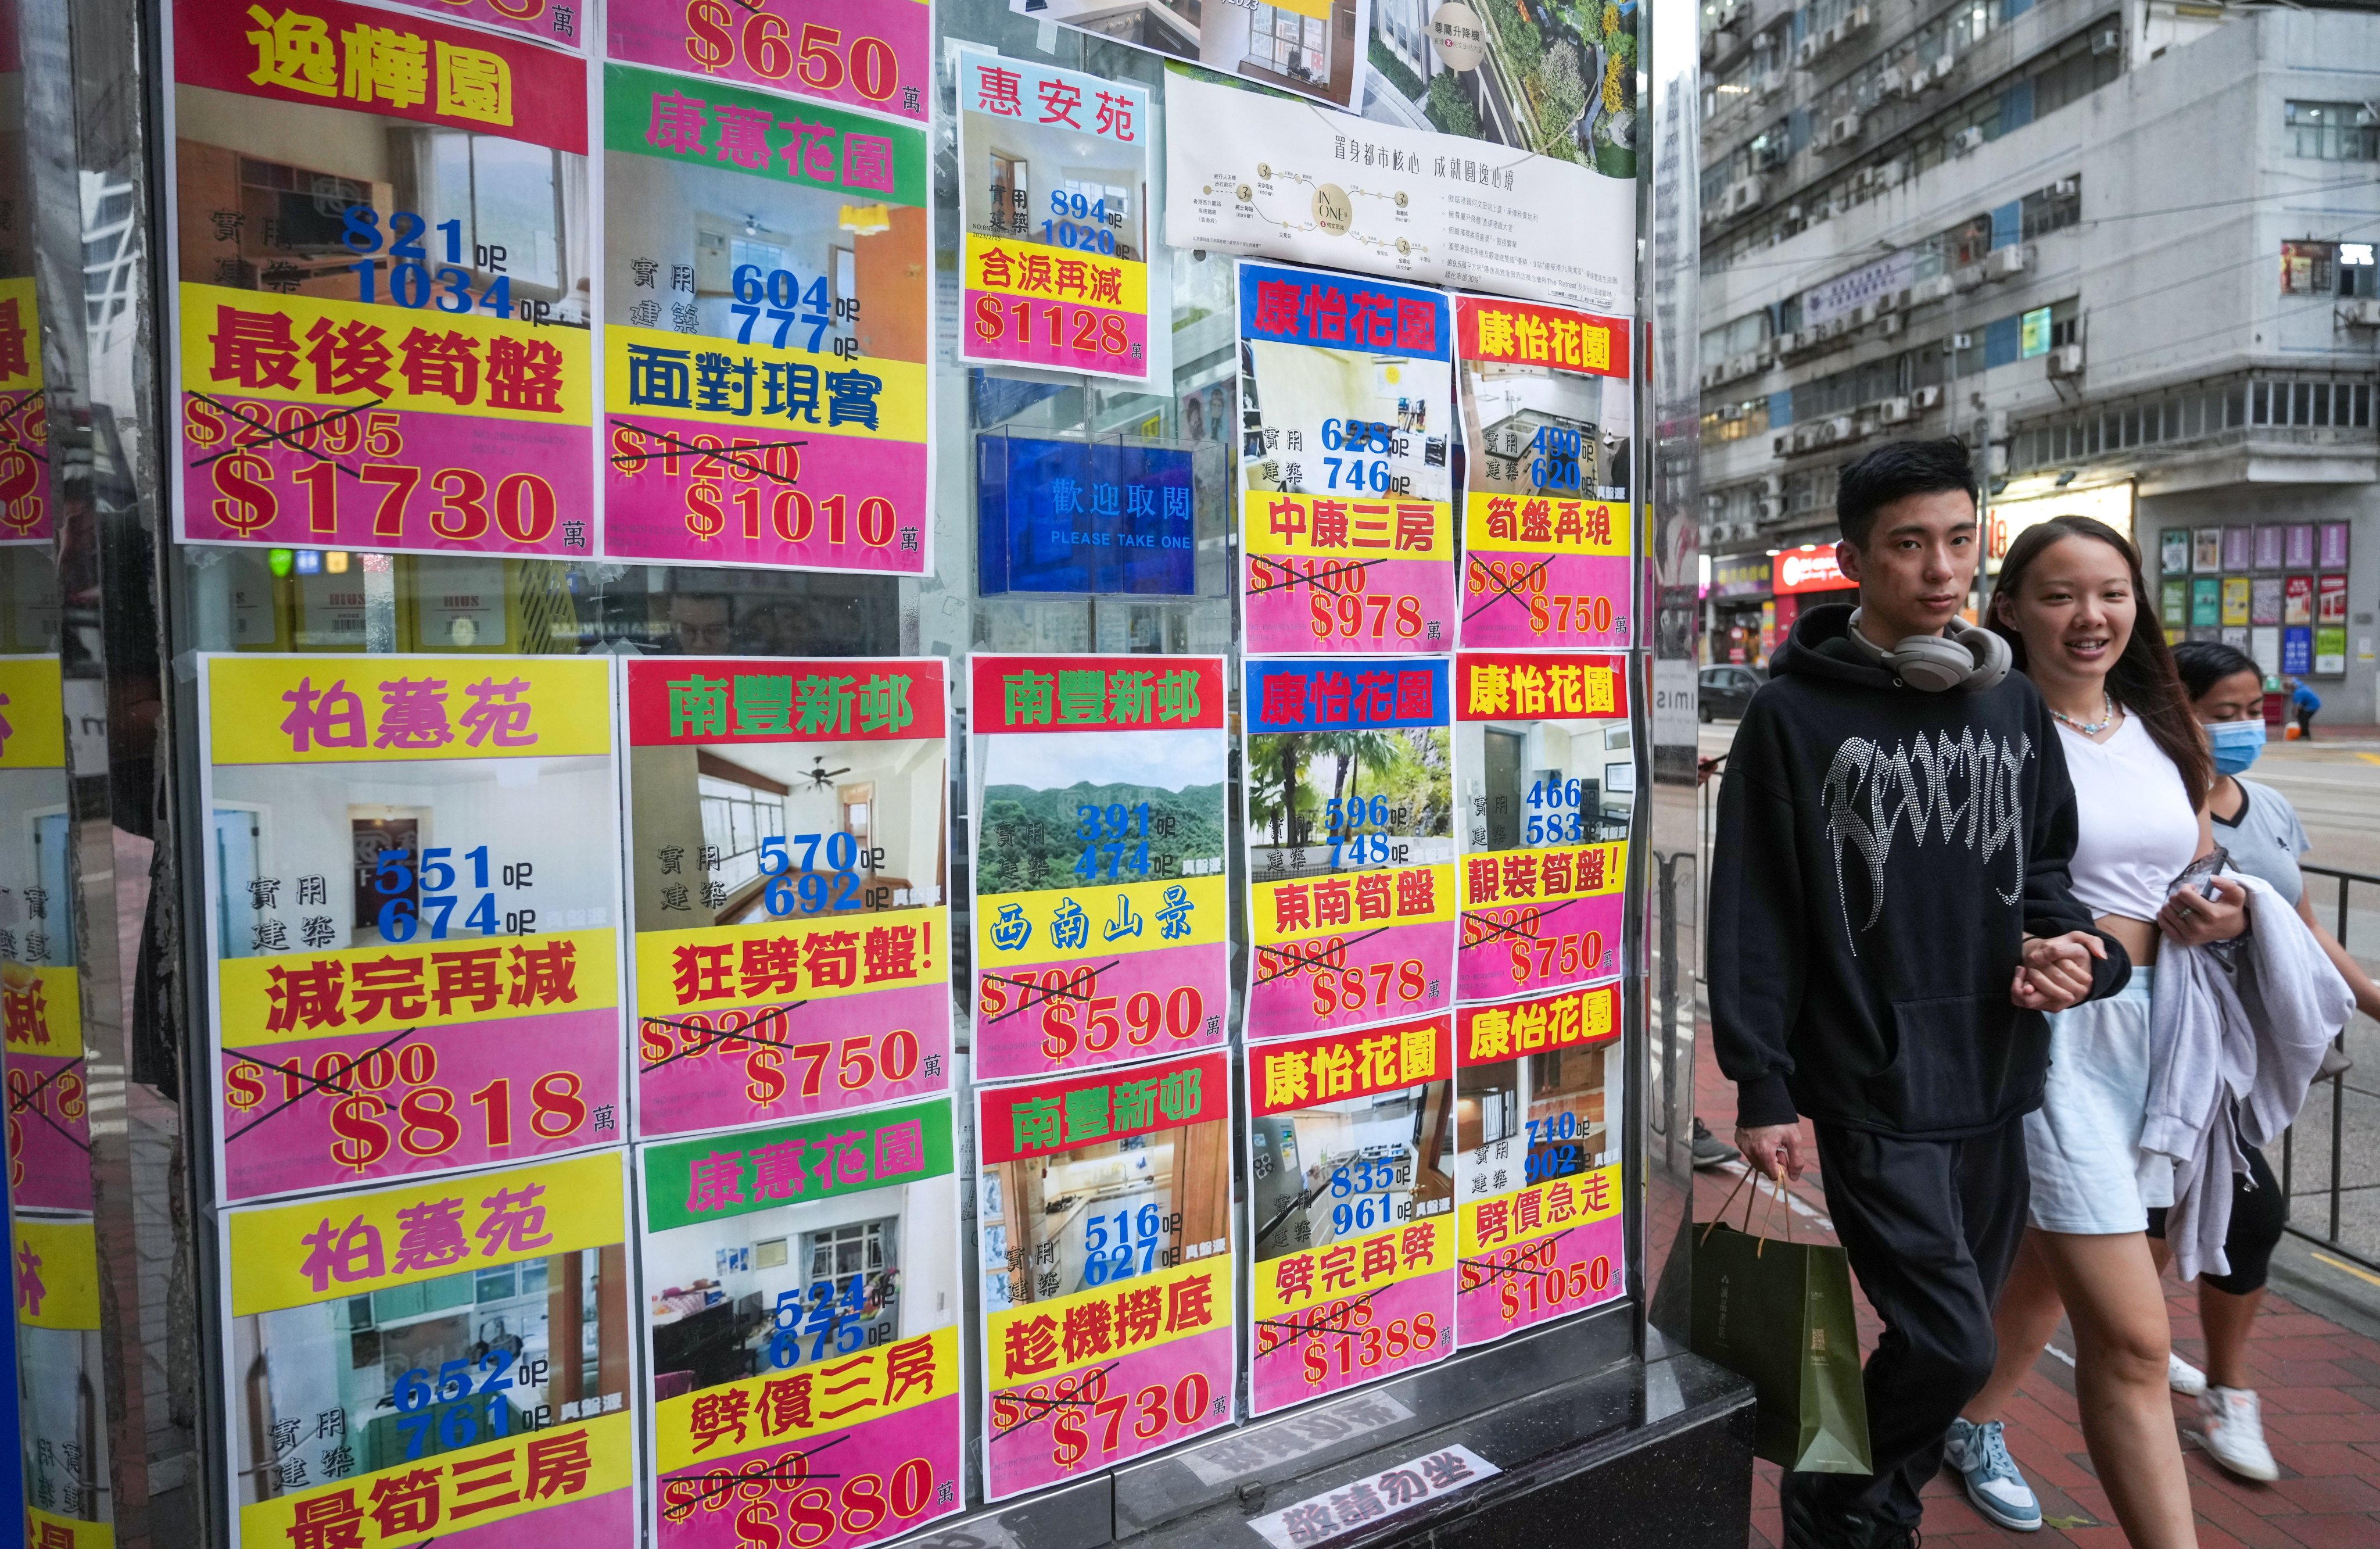 People walk past property advertisements in Quarry Bay on April 19. Even though home prices have fallen in recent years, they are still beyond the reach of many in Hong Kong. Photo: Sam Tsang